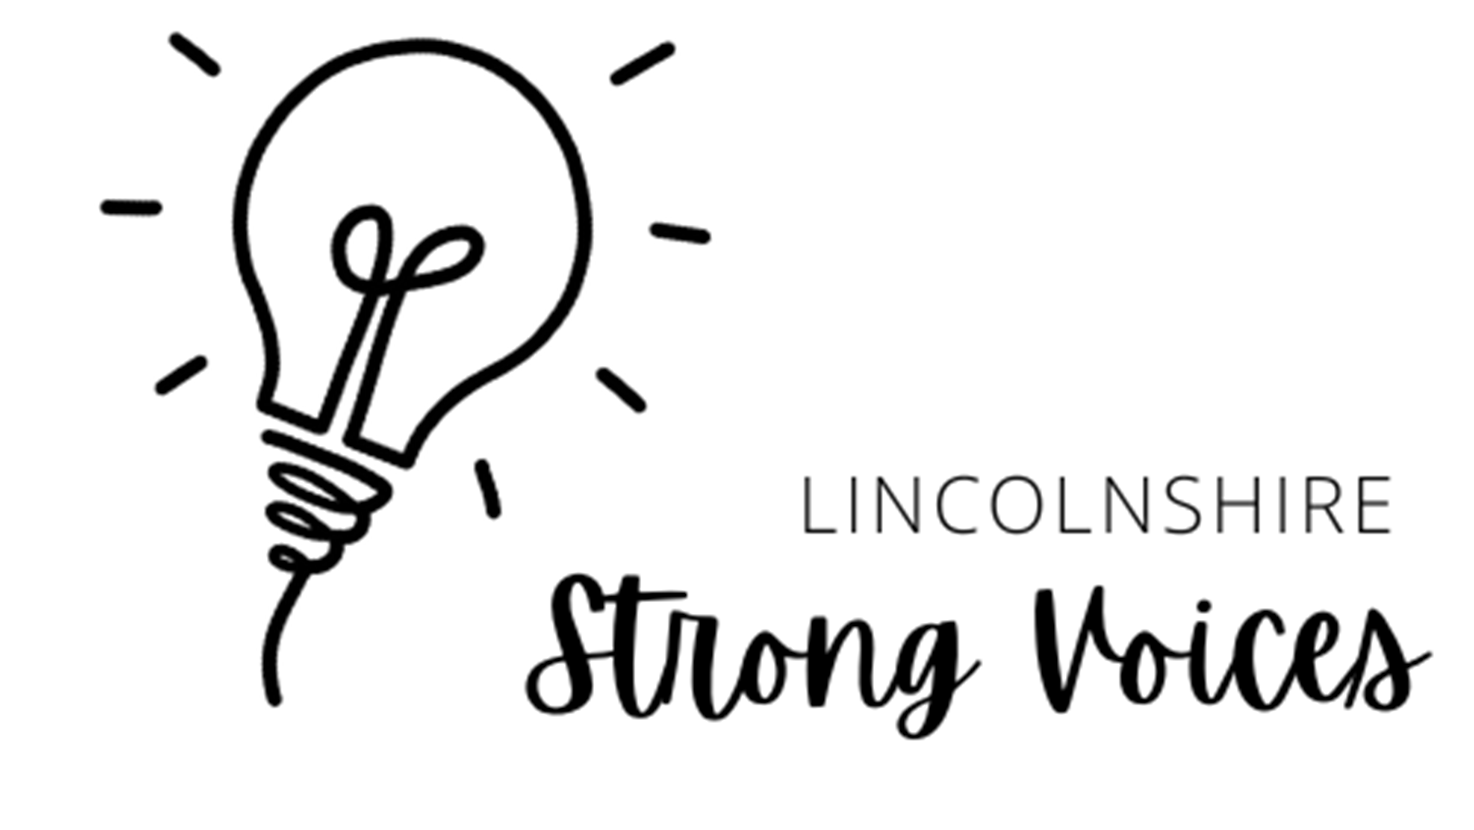 Lincolnshire Strong Voices